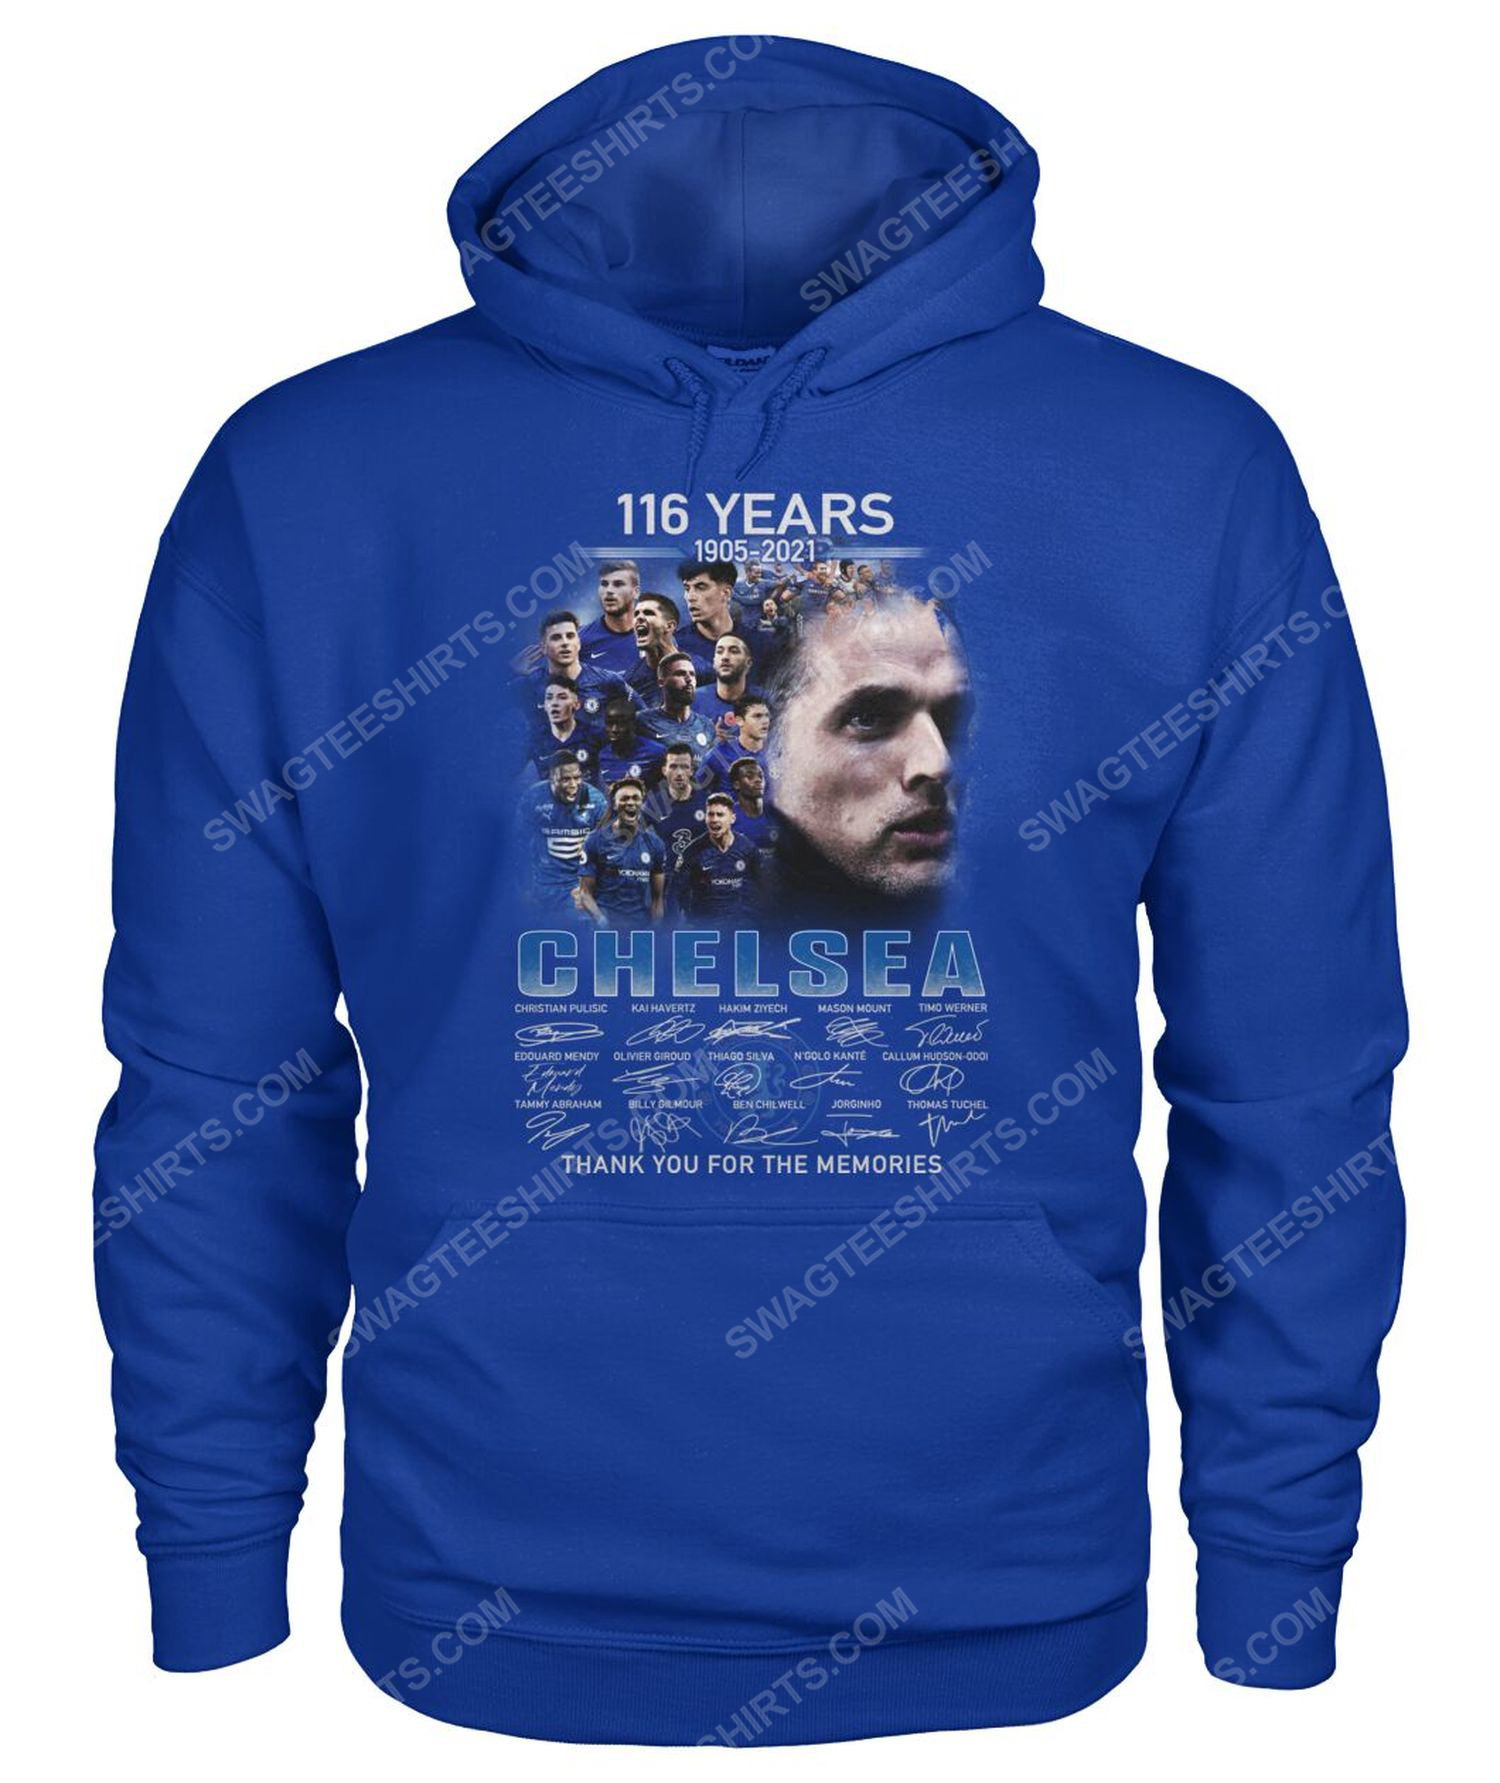 Chelsea fc thank you for the memories hoodie